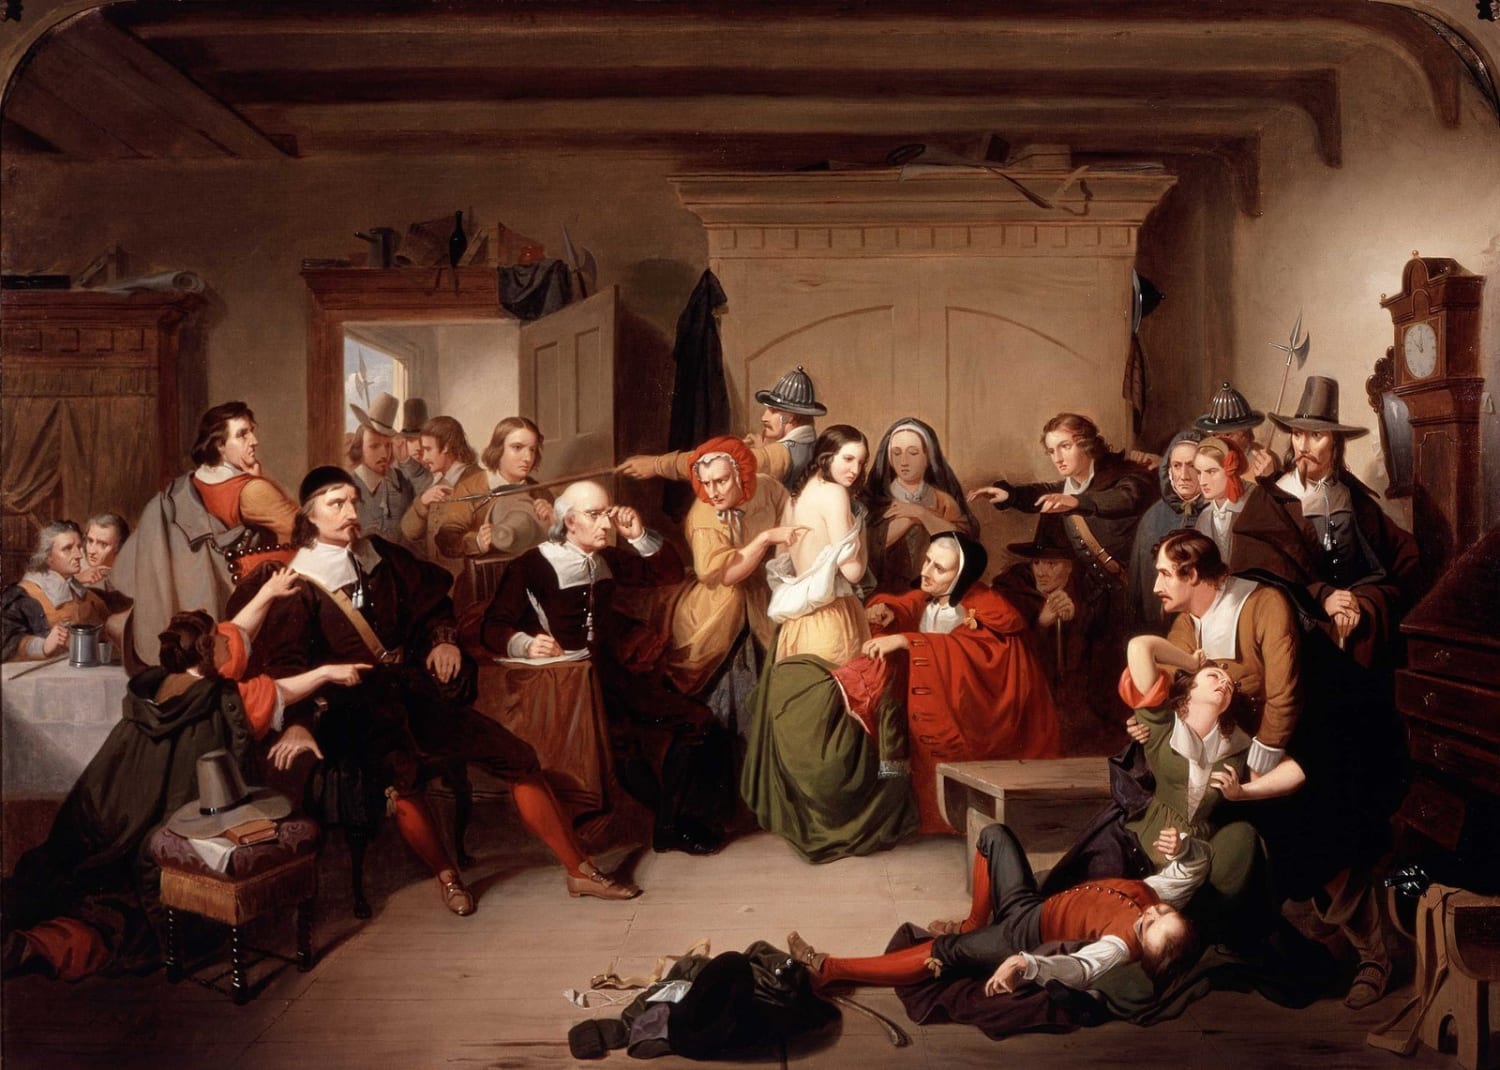 A Brief History of the Salem Witch Trials